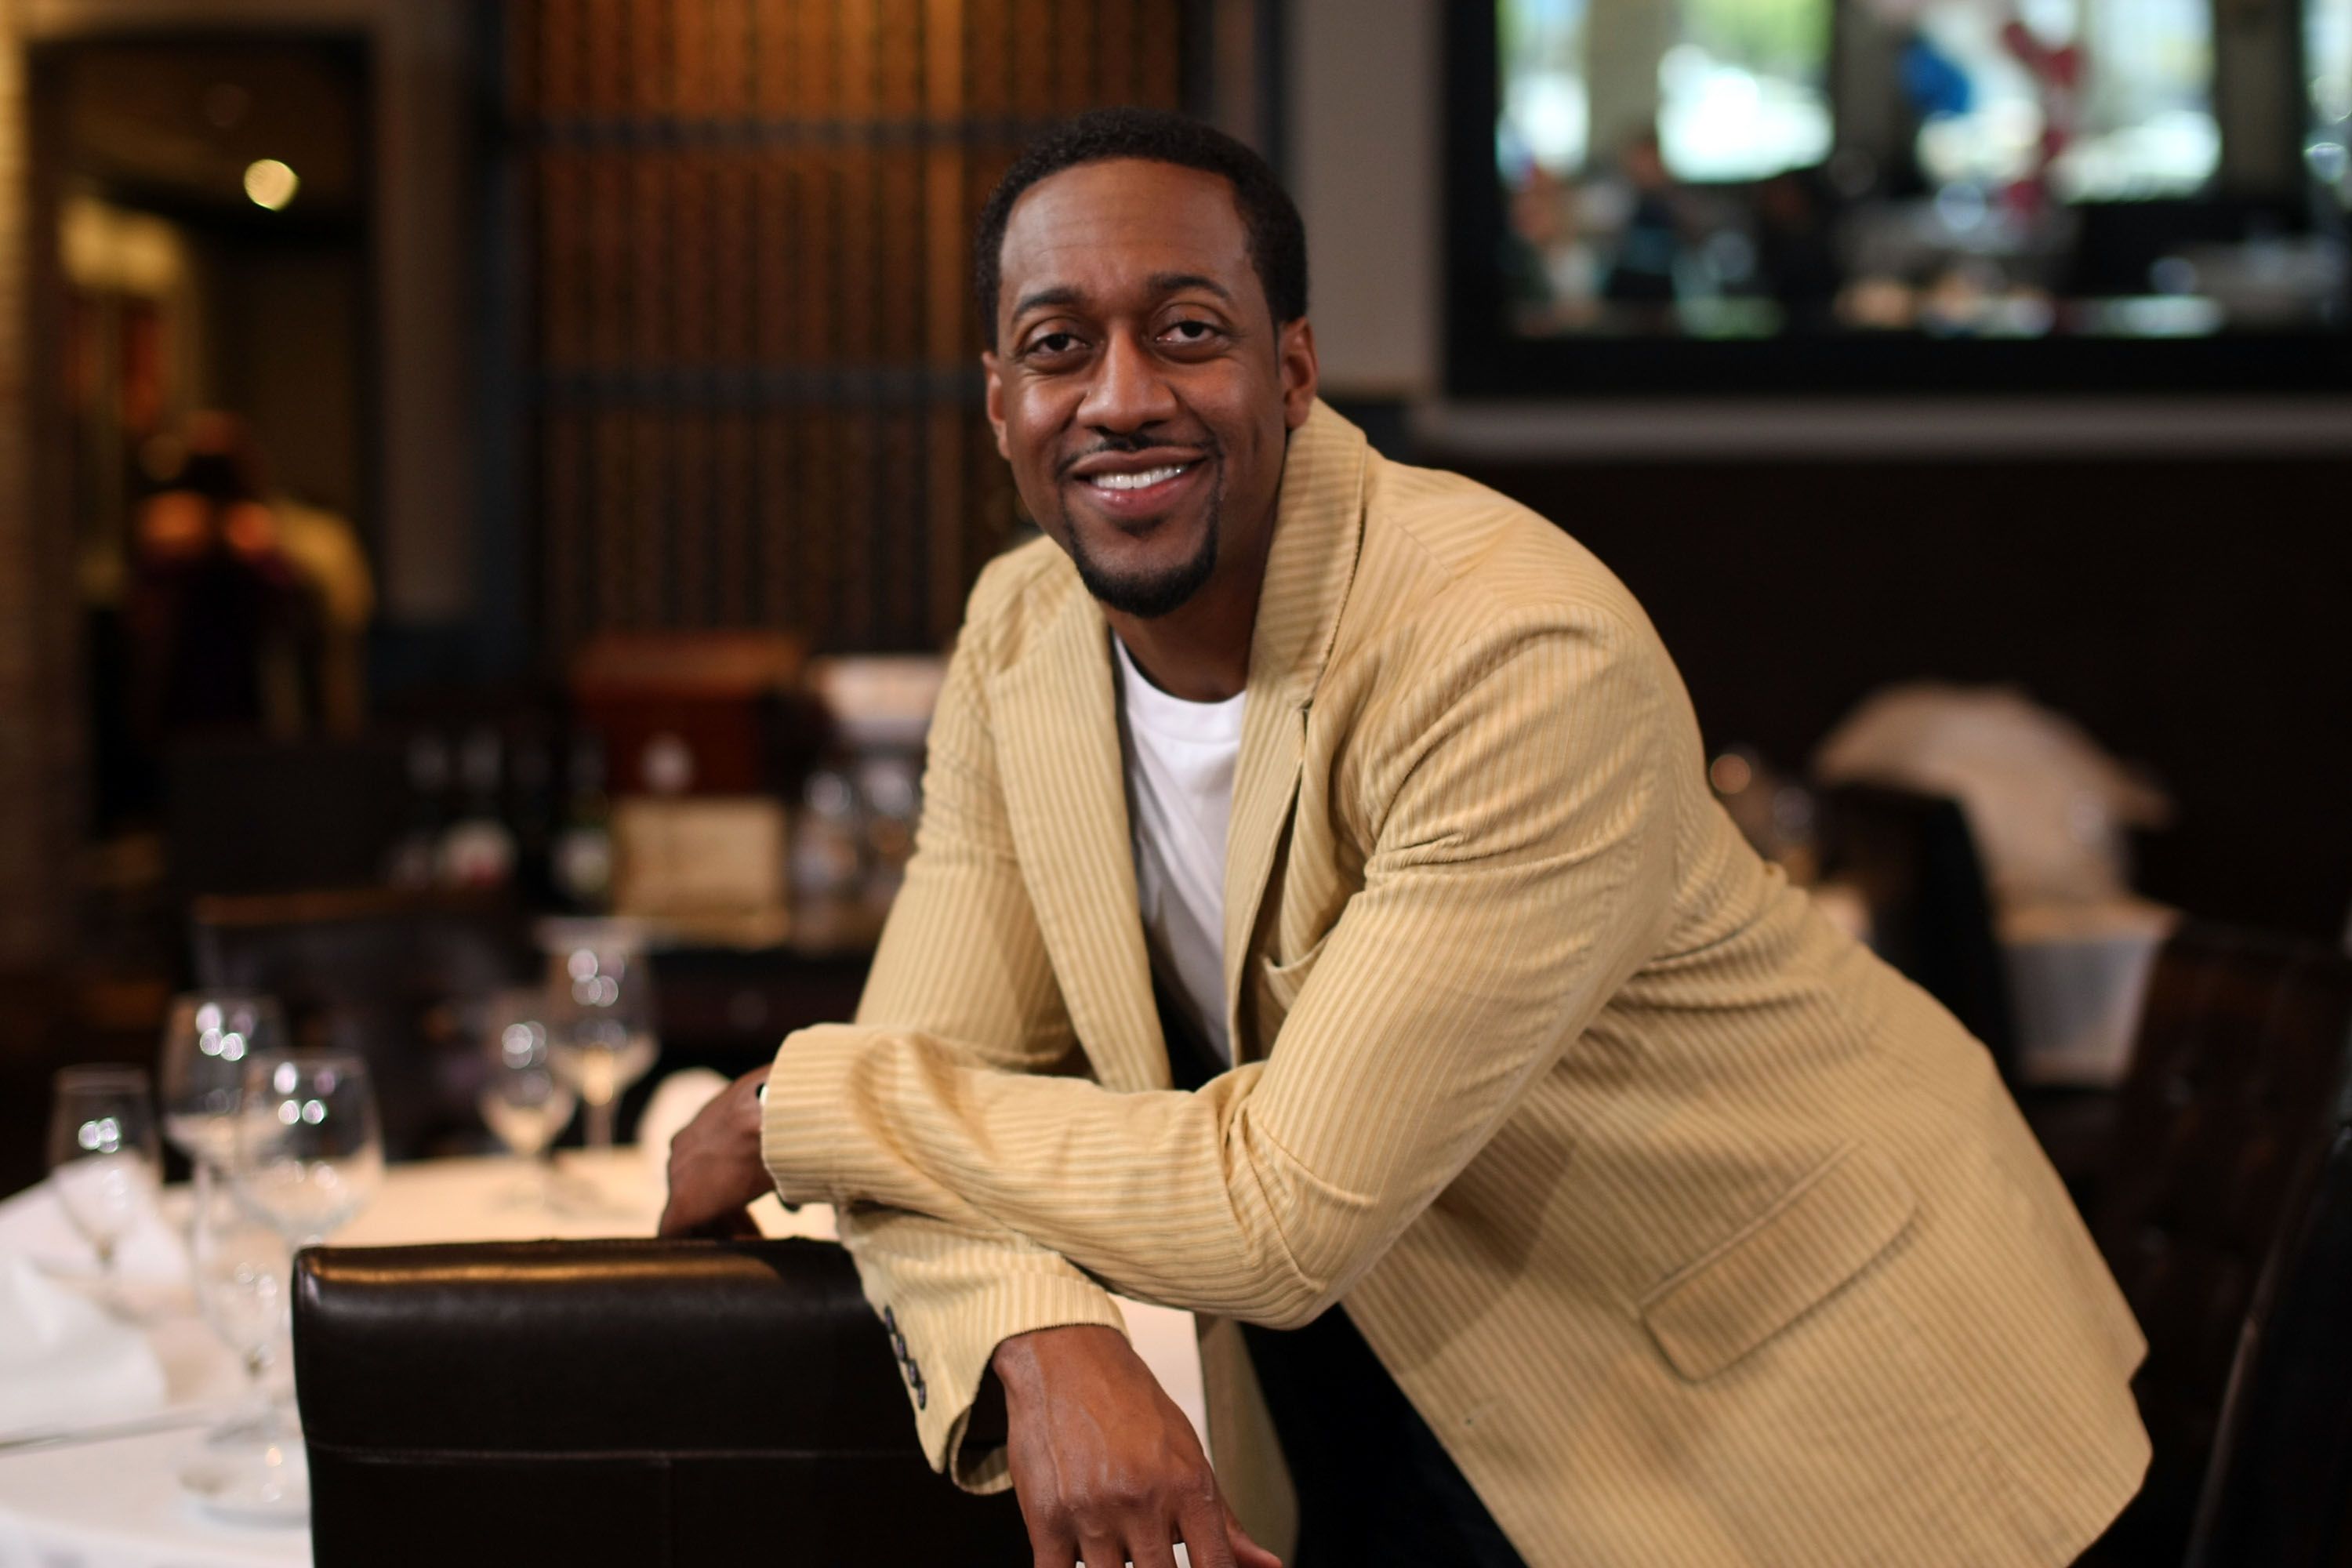 Jaleel White on the set of "Road to the Altar"  in Encino, California in April 2009. | Photo: Getty Images